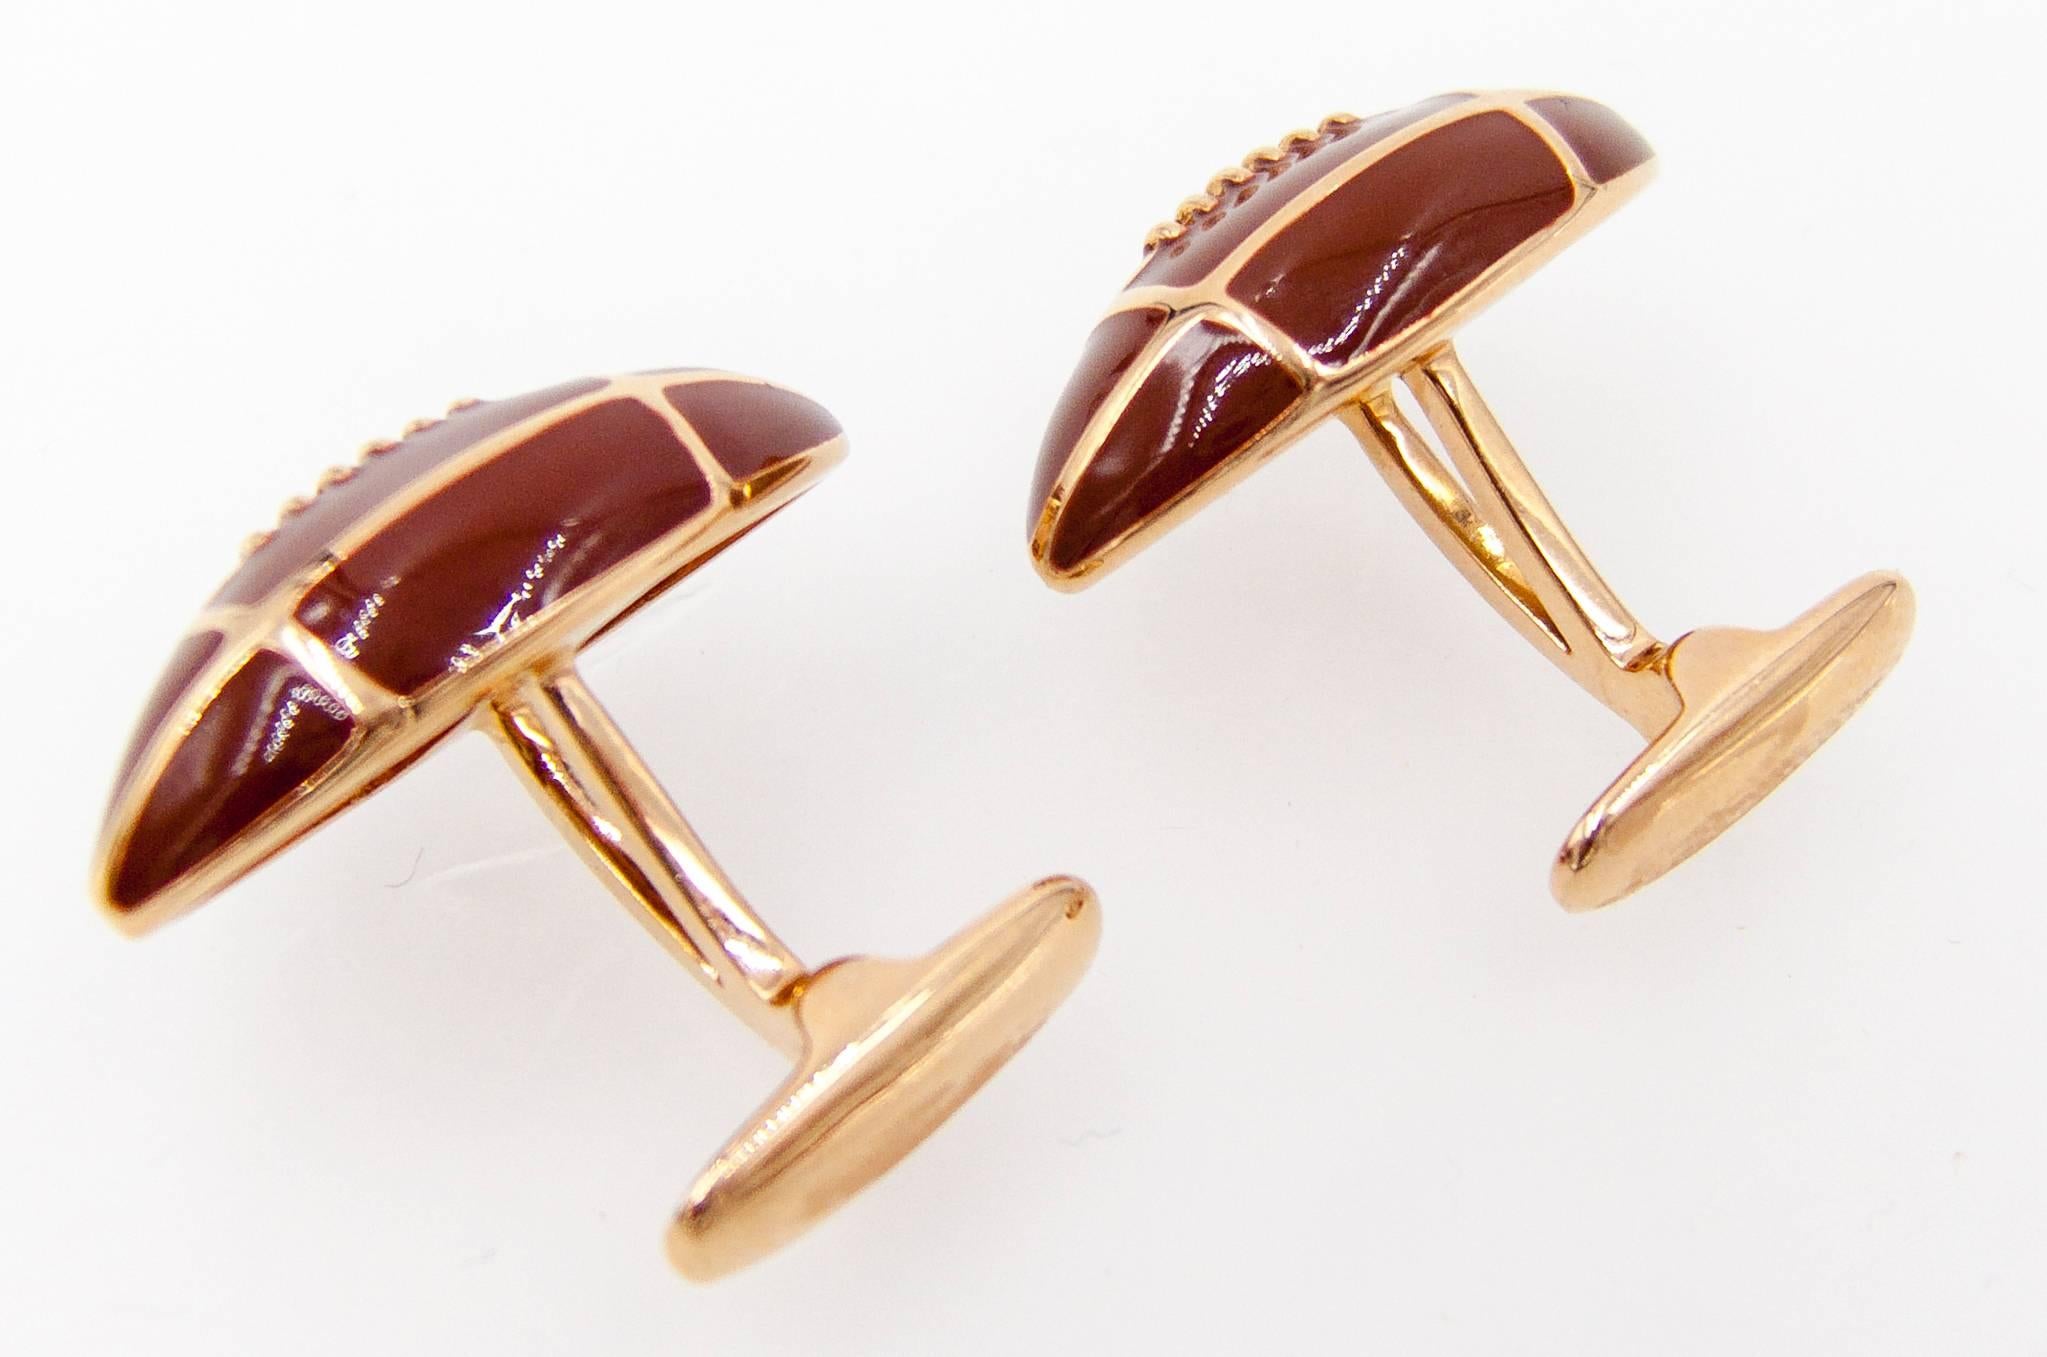 No matter which team you've bet on, these football cufflinks will remind the wearer of the game's excitement.   The footballs are carnelian colored enamel, and the other end easily slips through any buttonhole with the flip of its nicely engineered